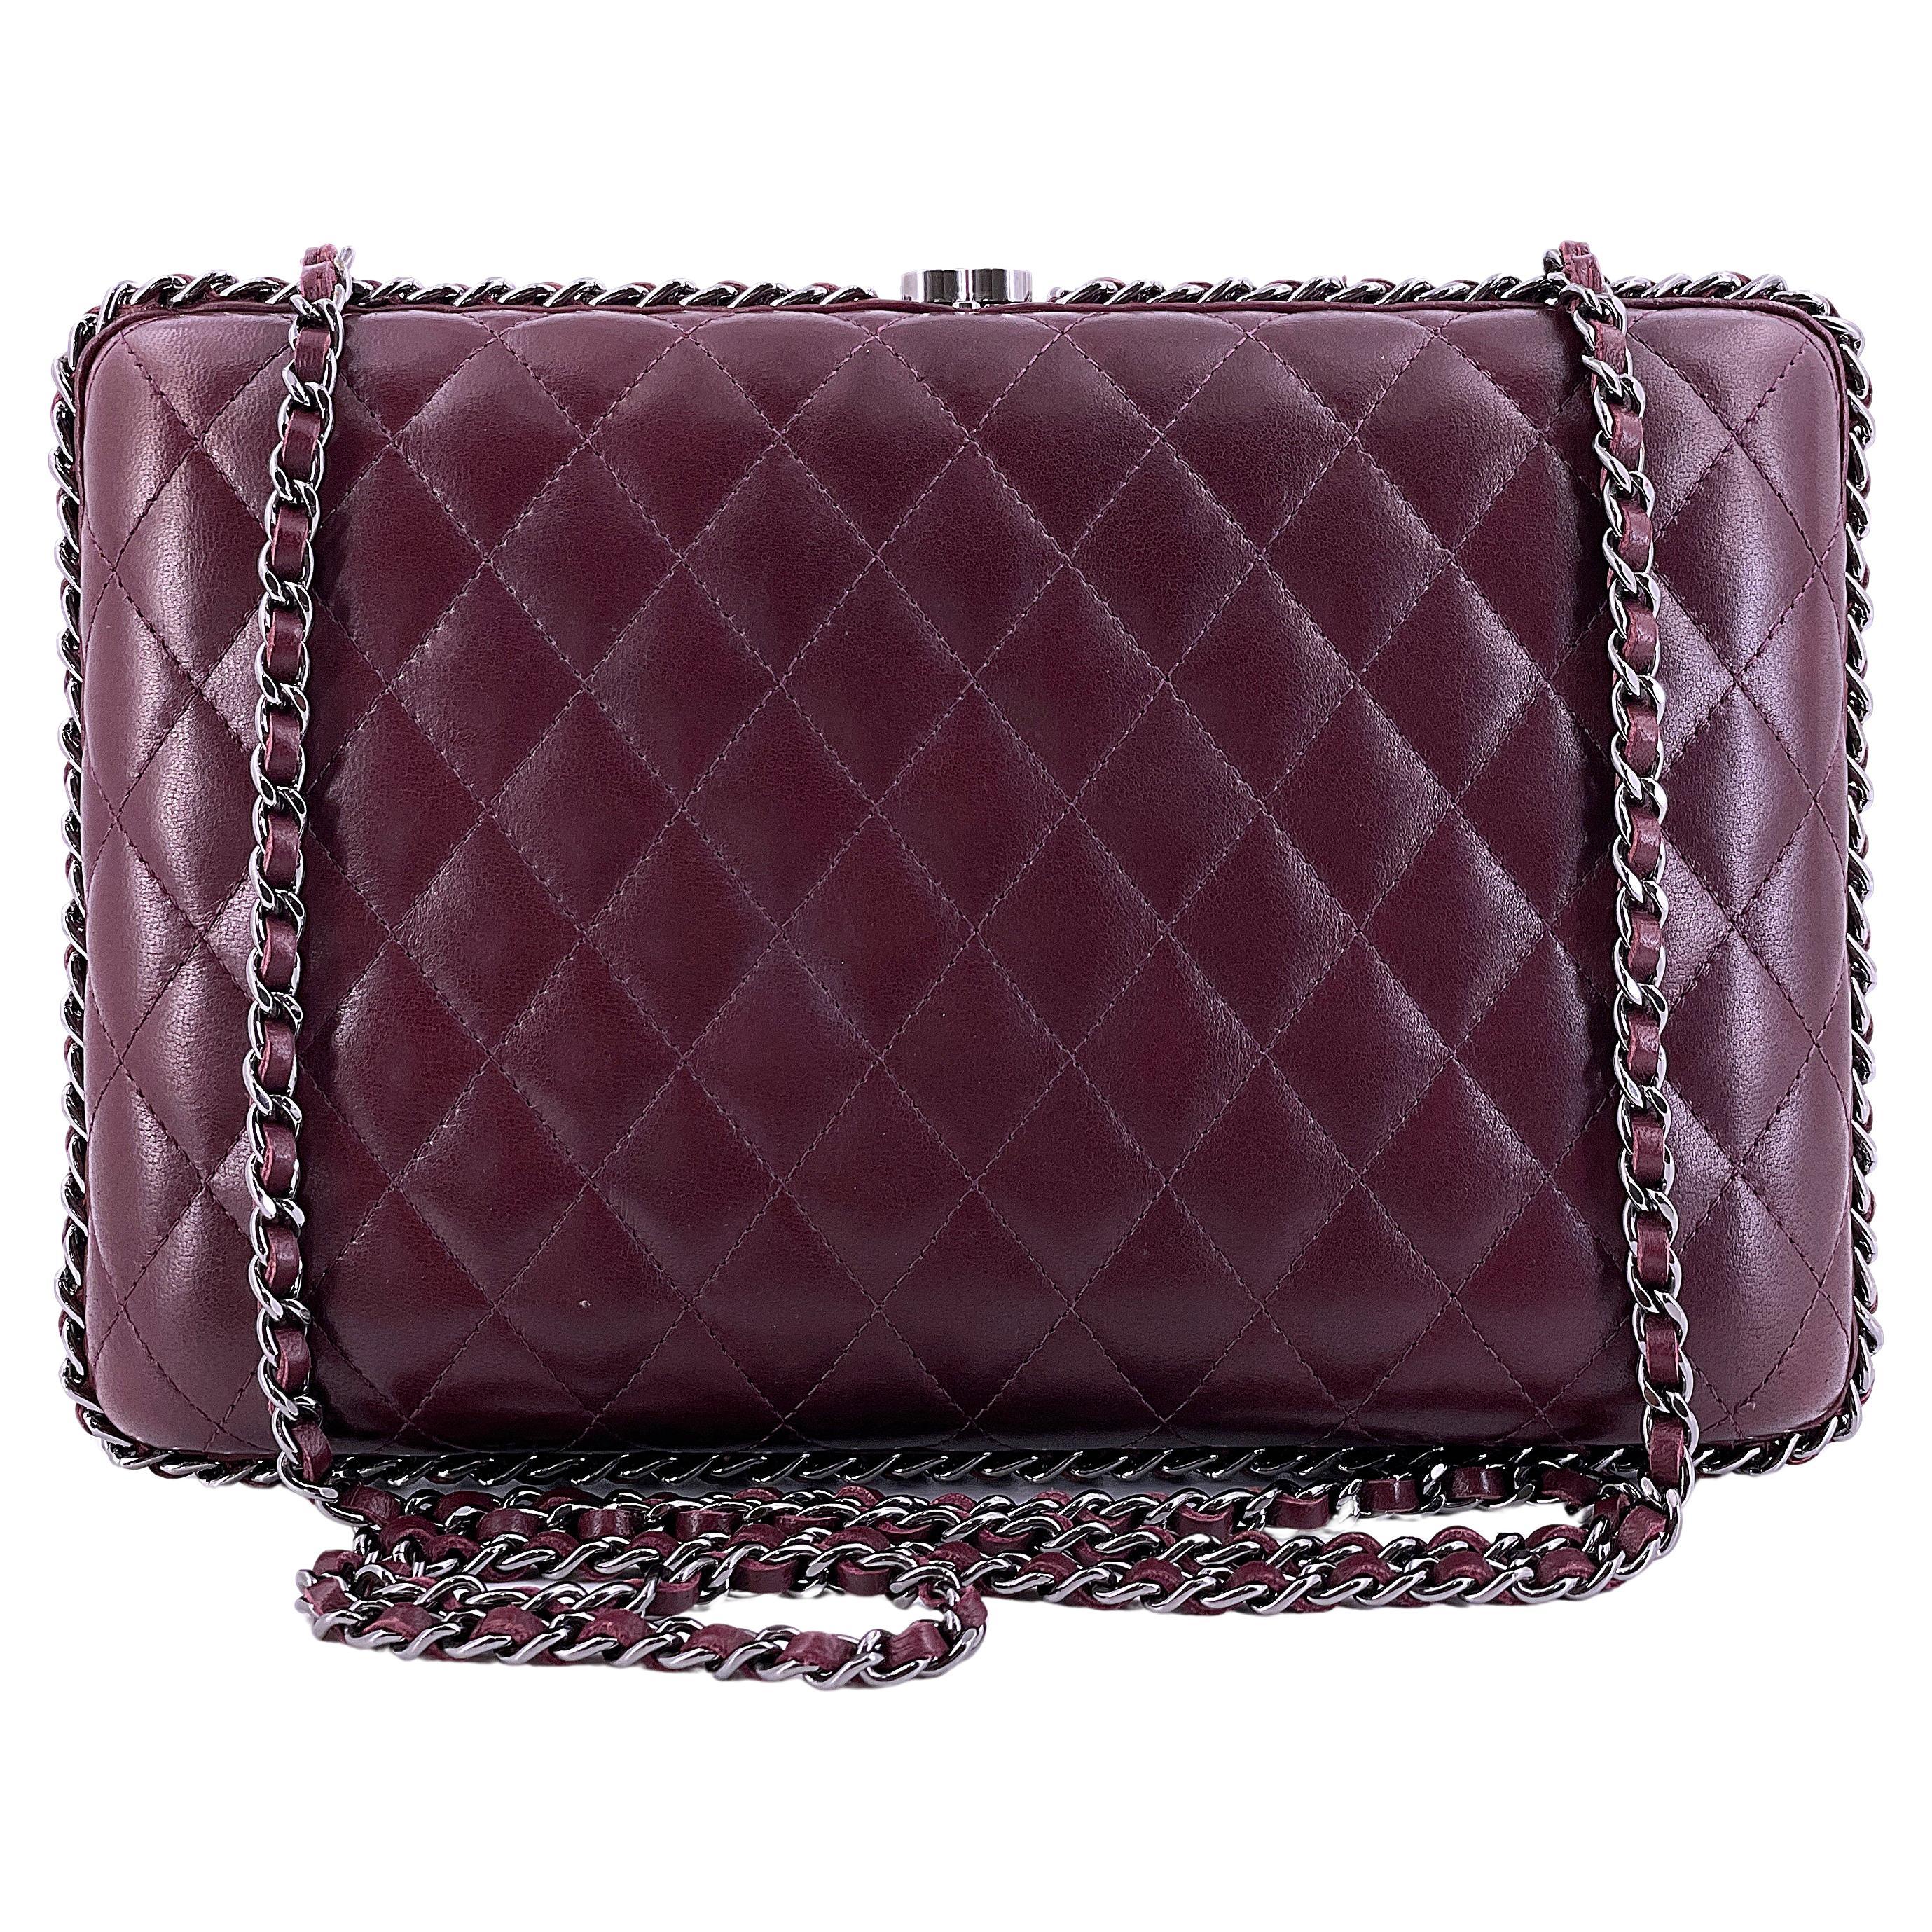 Chanel 2012 Bordeaux Oversized Hard Quilted Chain Around Clutch Bag RHW 67849 For Sale